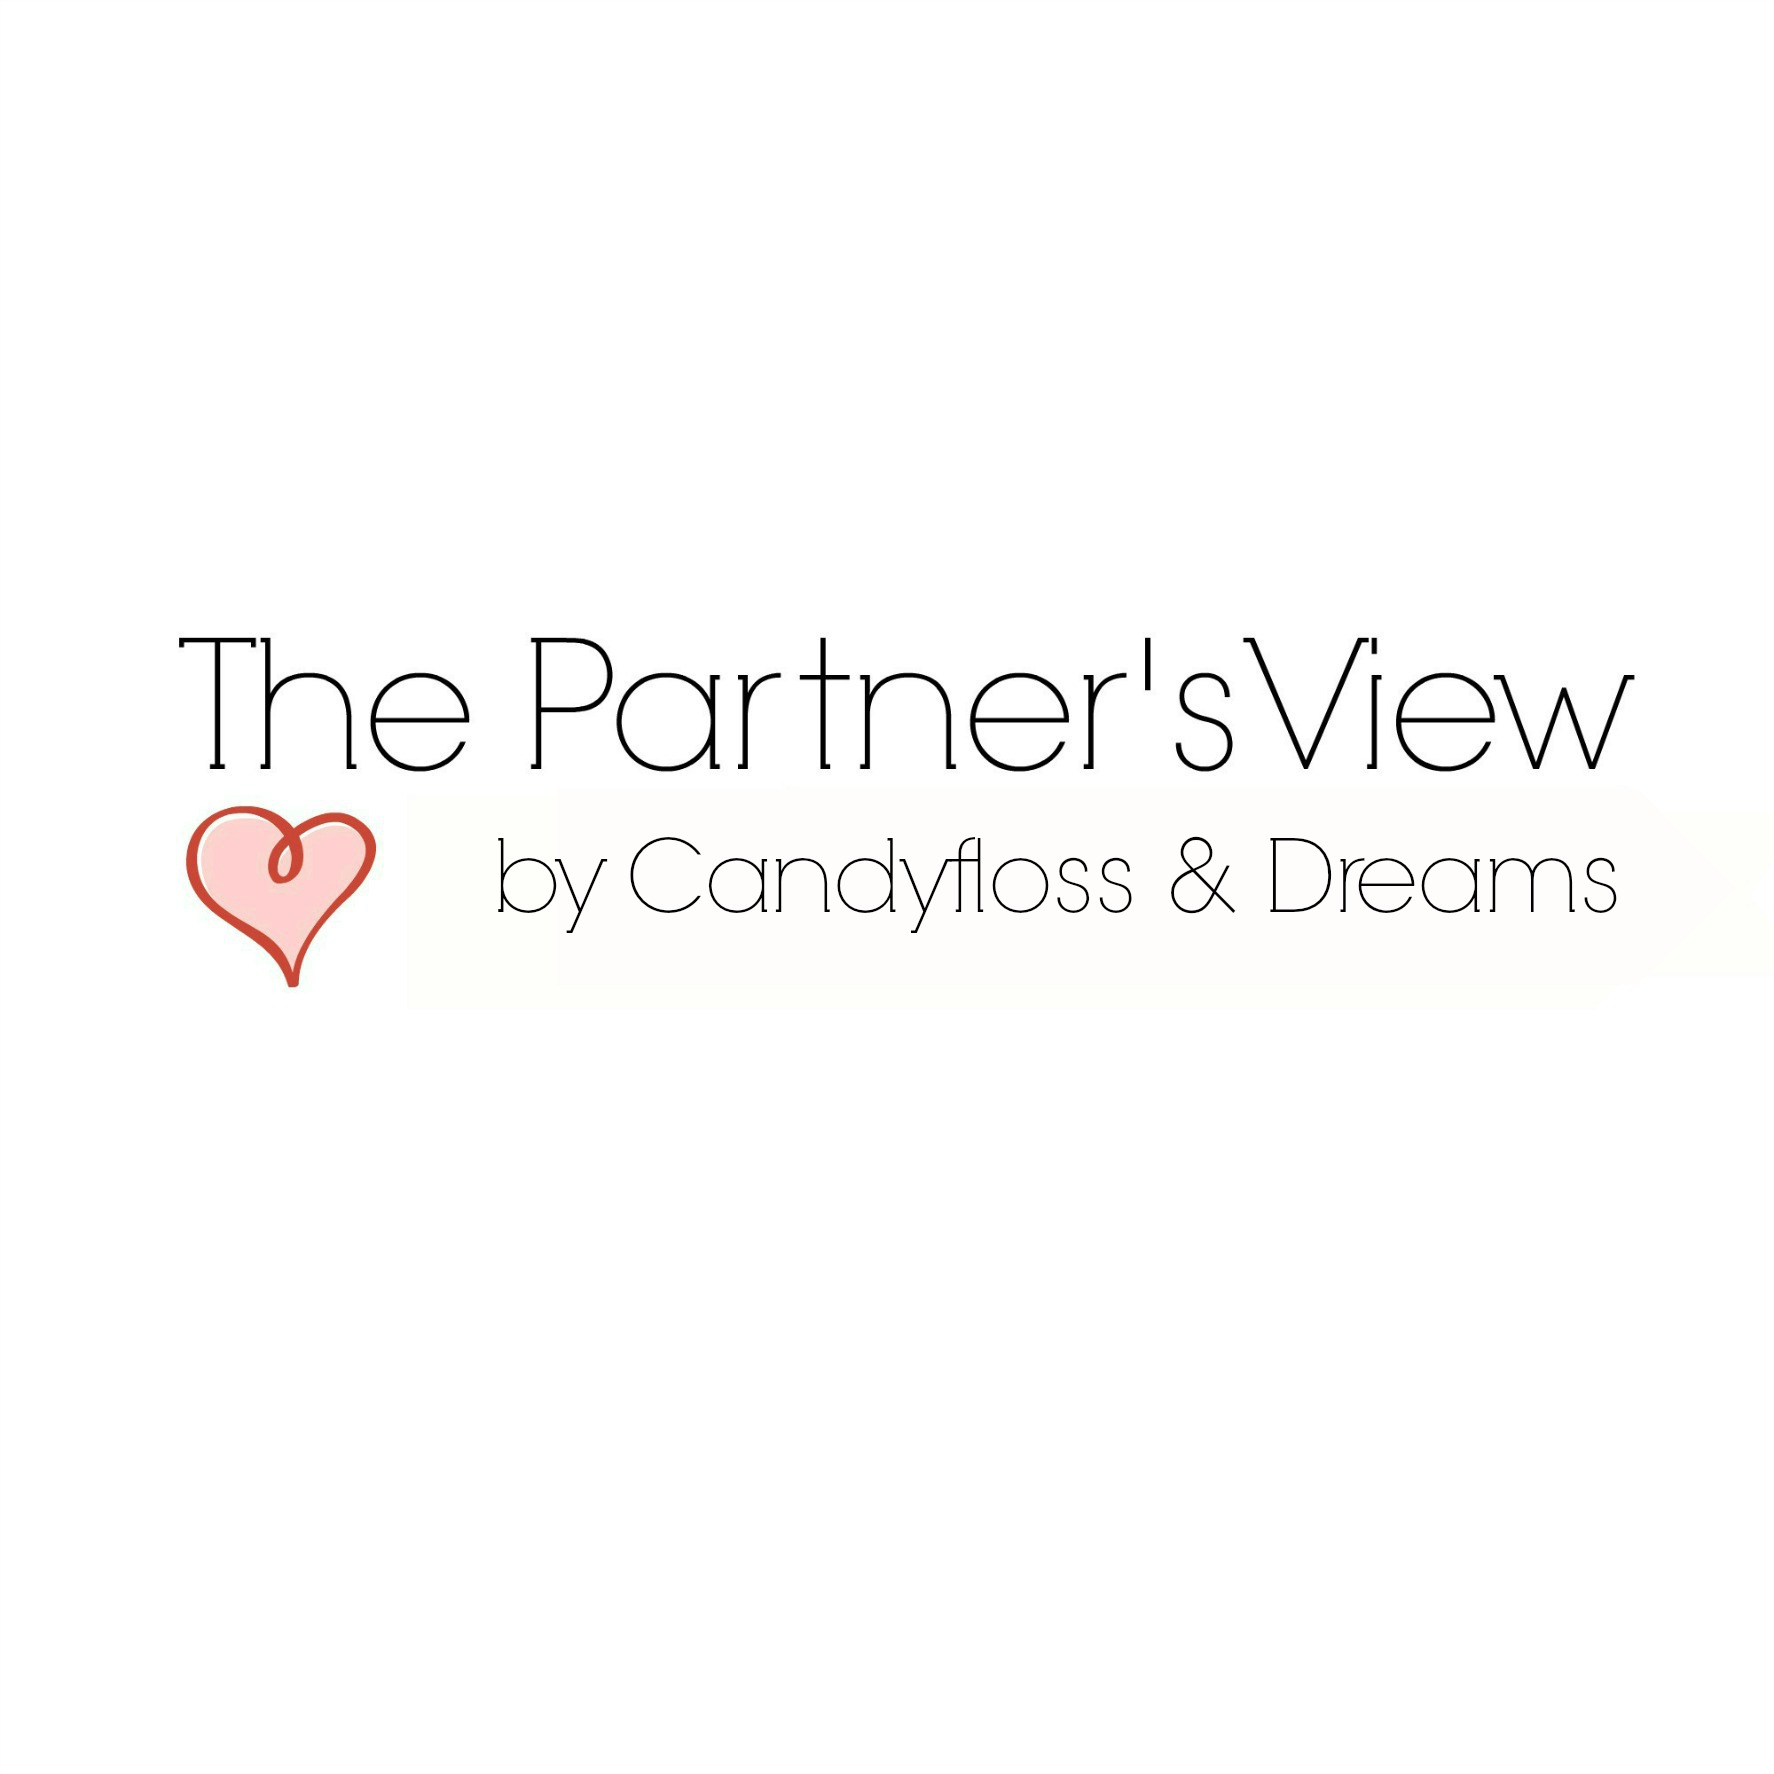 The Partner's View featuring Candyfloss and Dreams